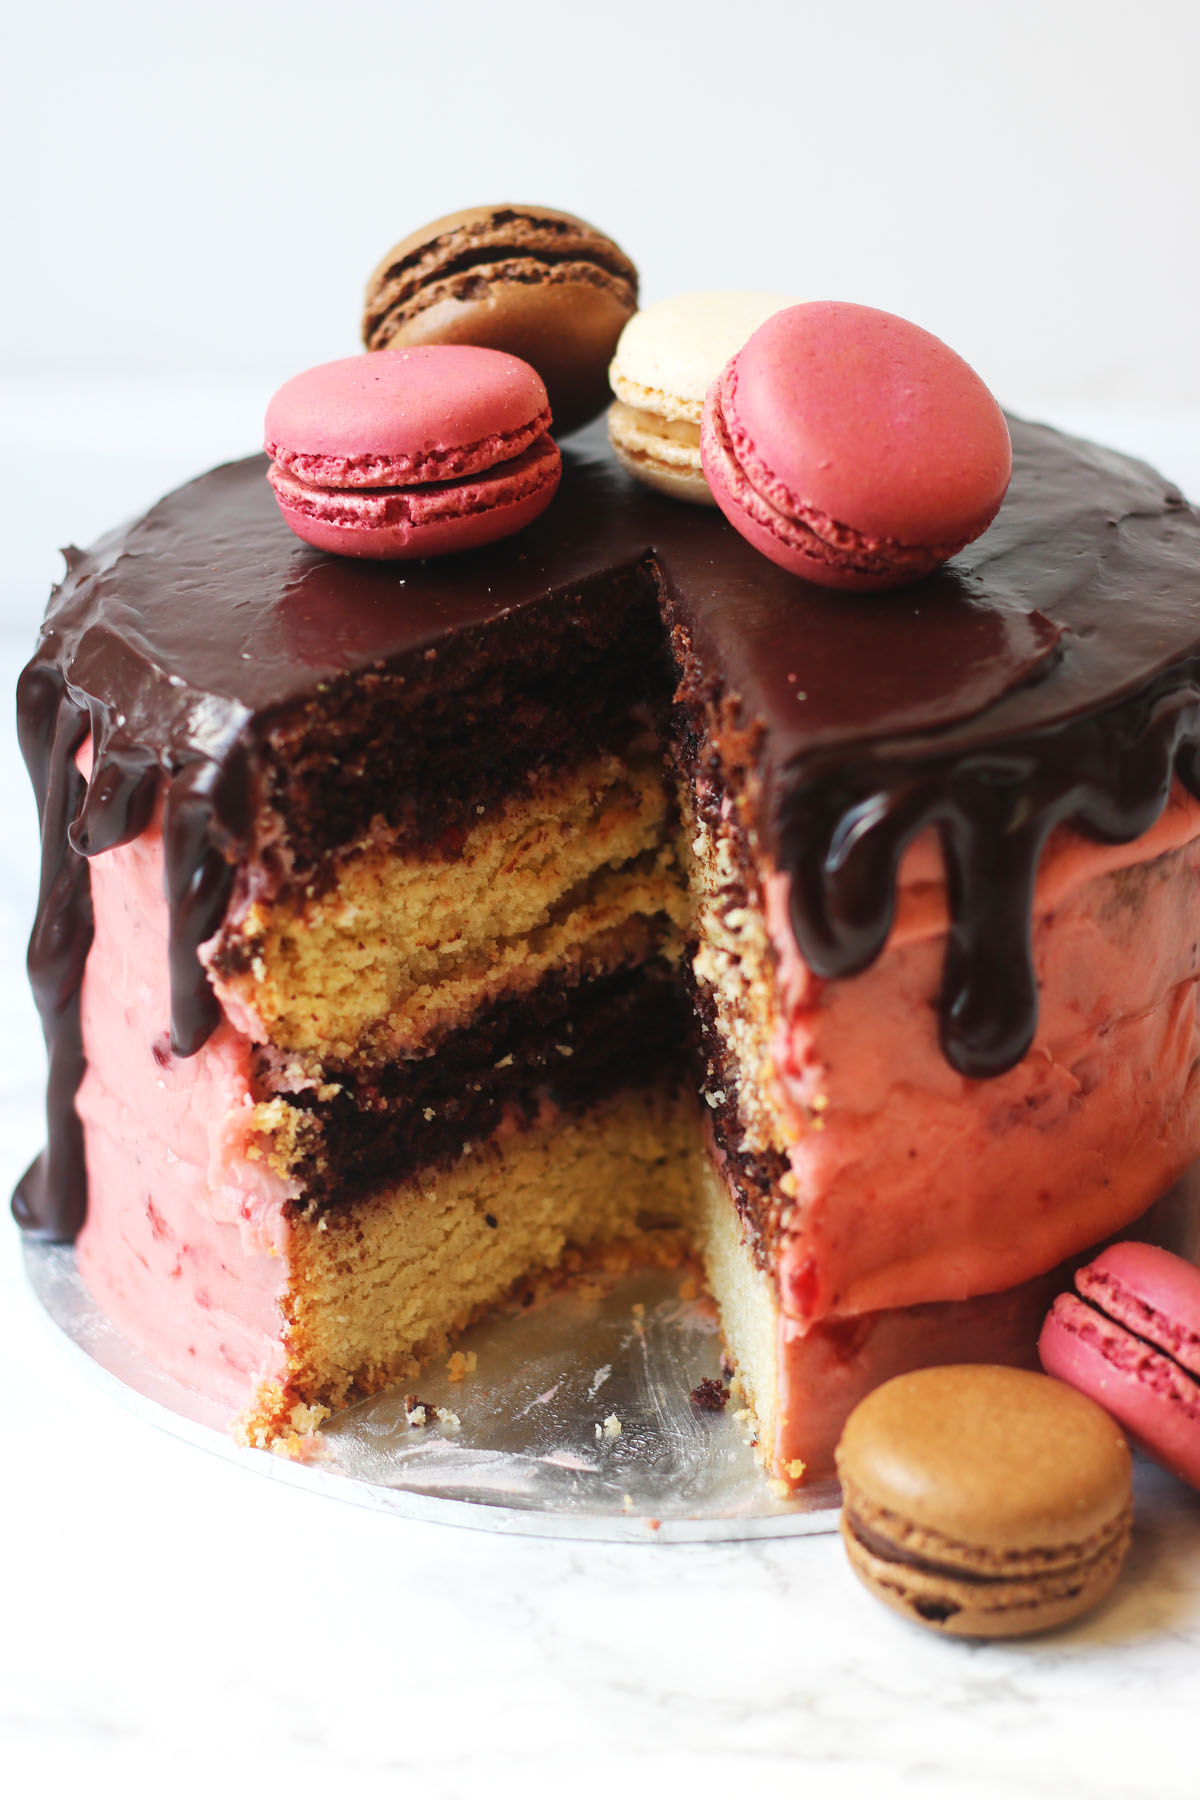 Neapolitan cake - layers of vanilla and chocolate sponge covered in real strawberry buttercream and chocolate ganache and topped with macarons